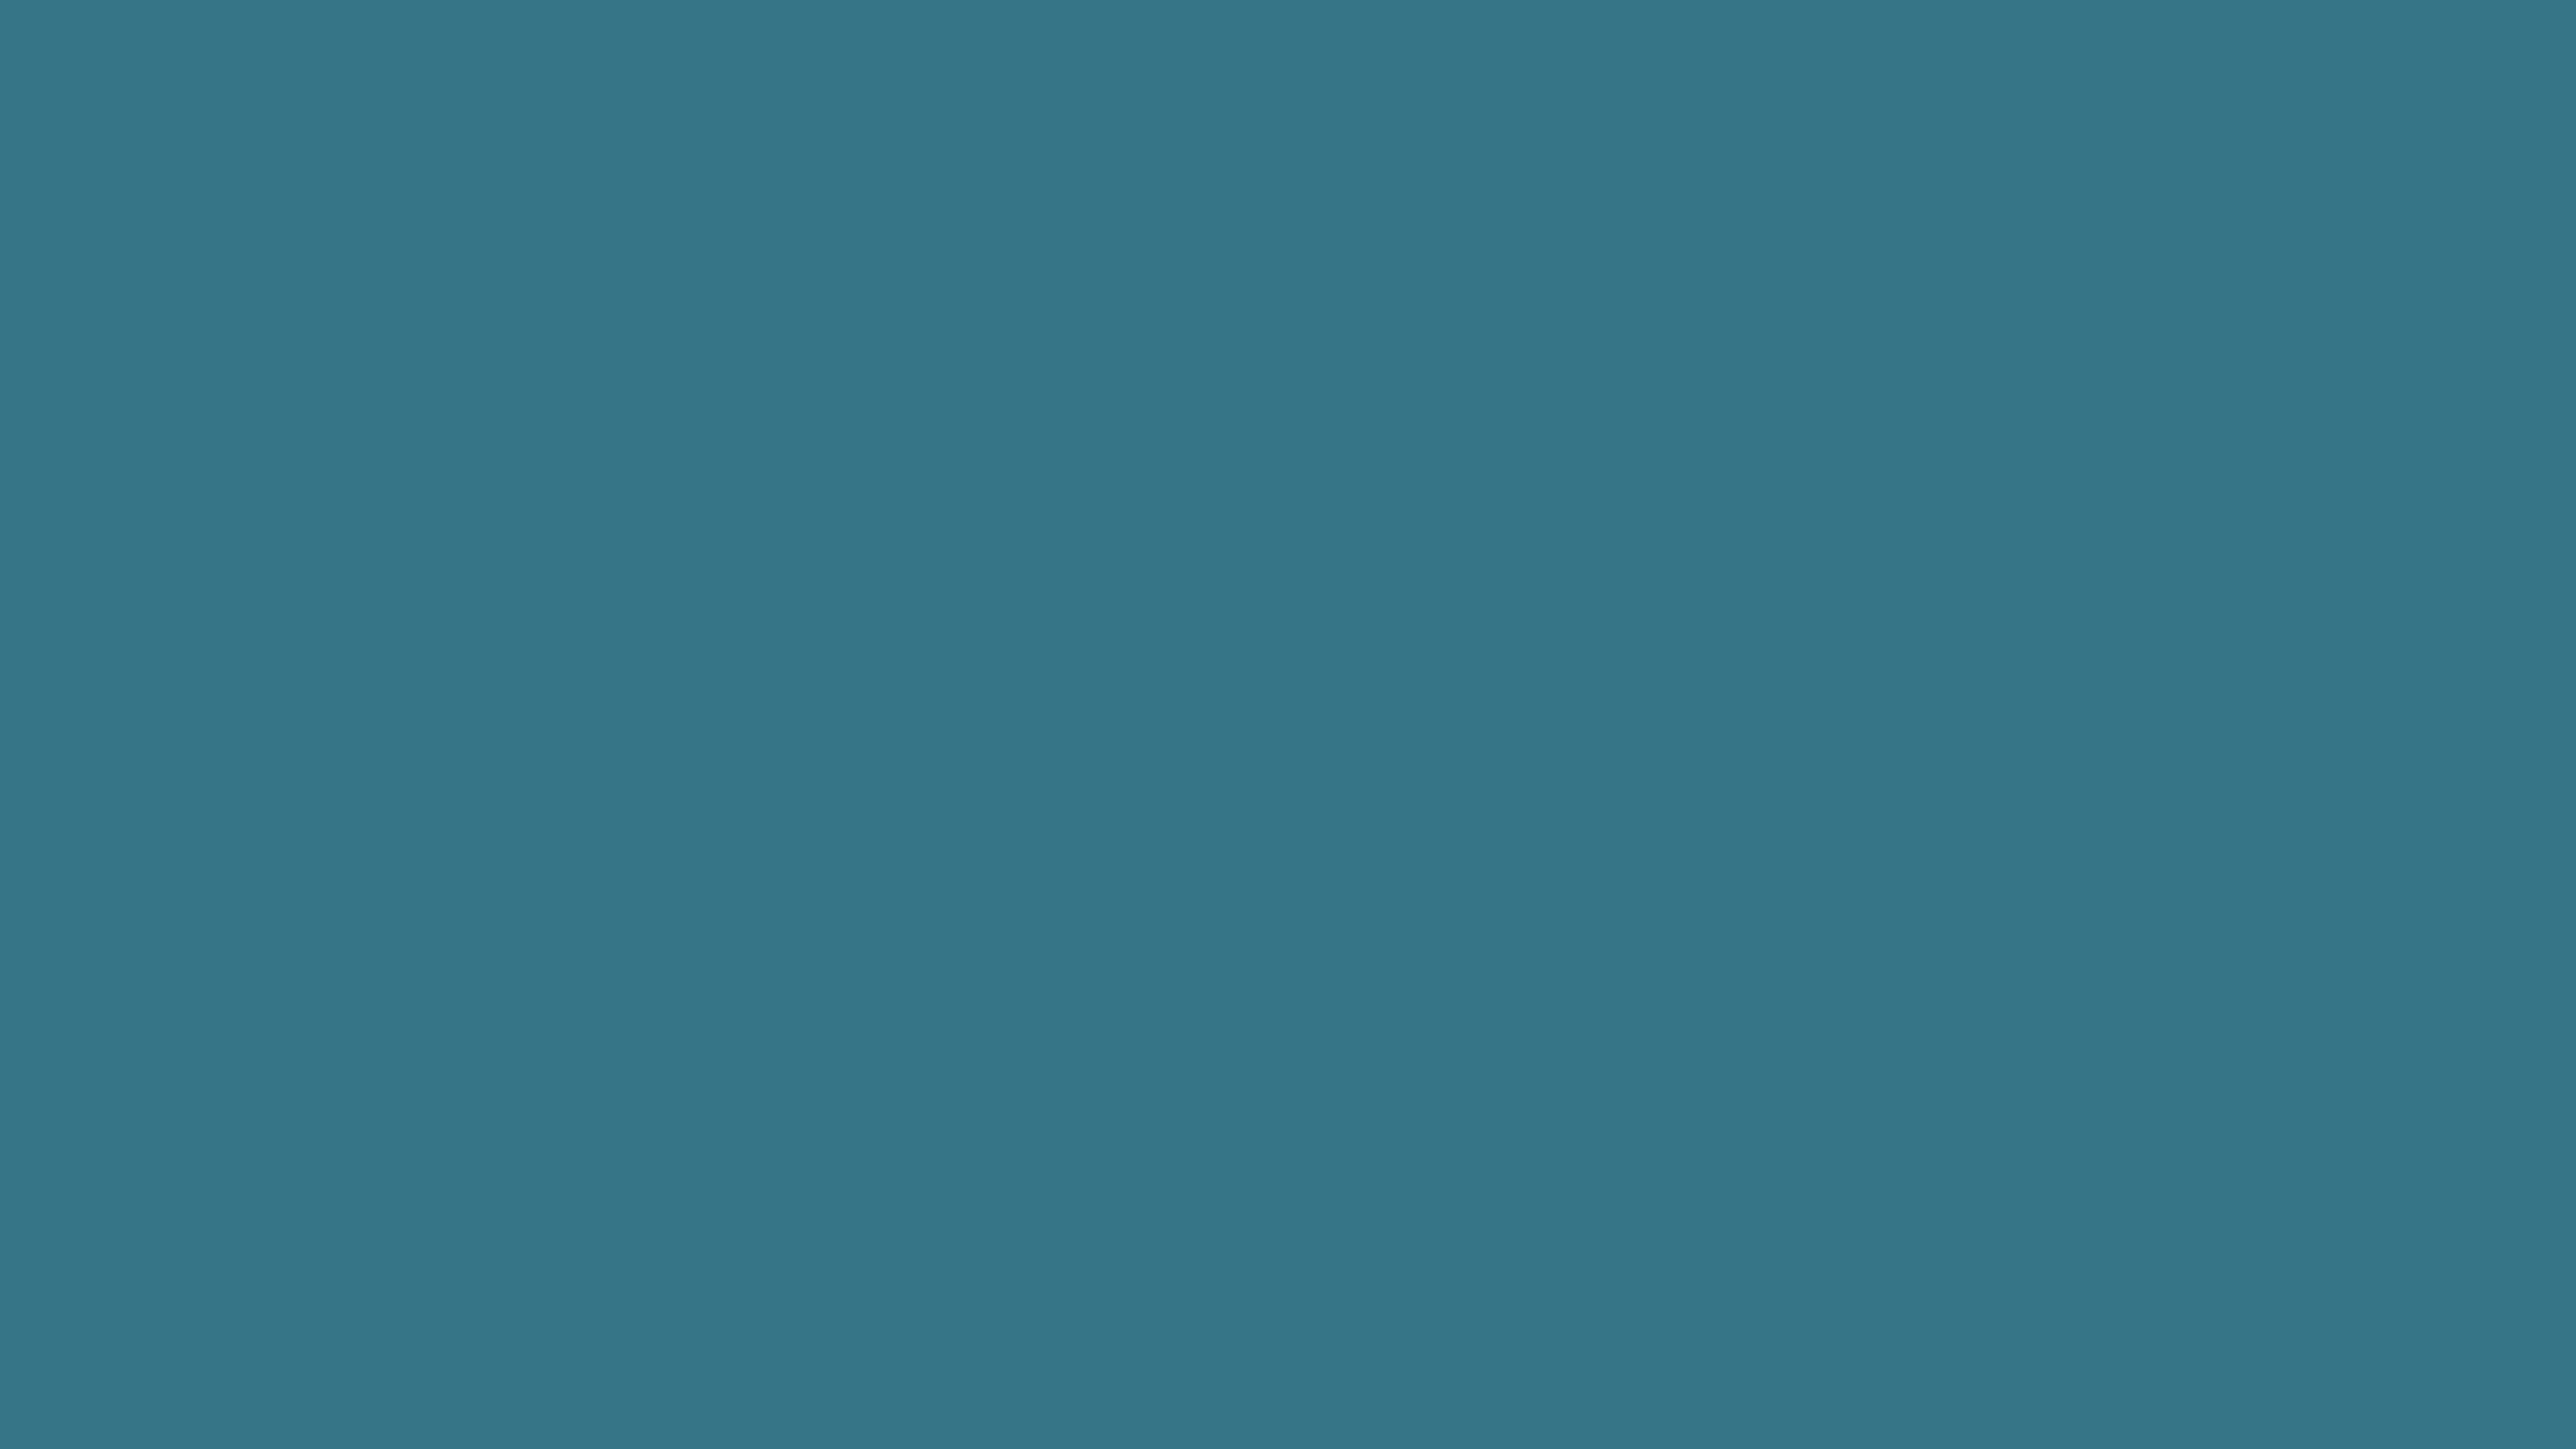 3840x2160 Teal Blue Solid Color Background 3840x2160